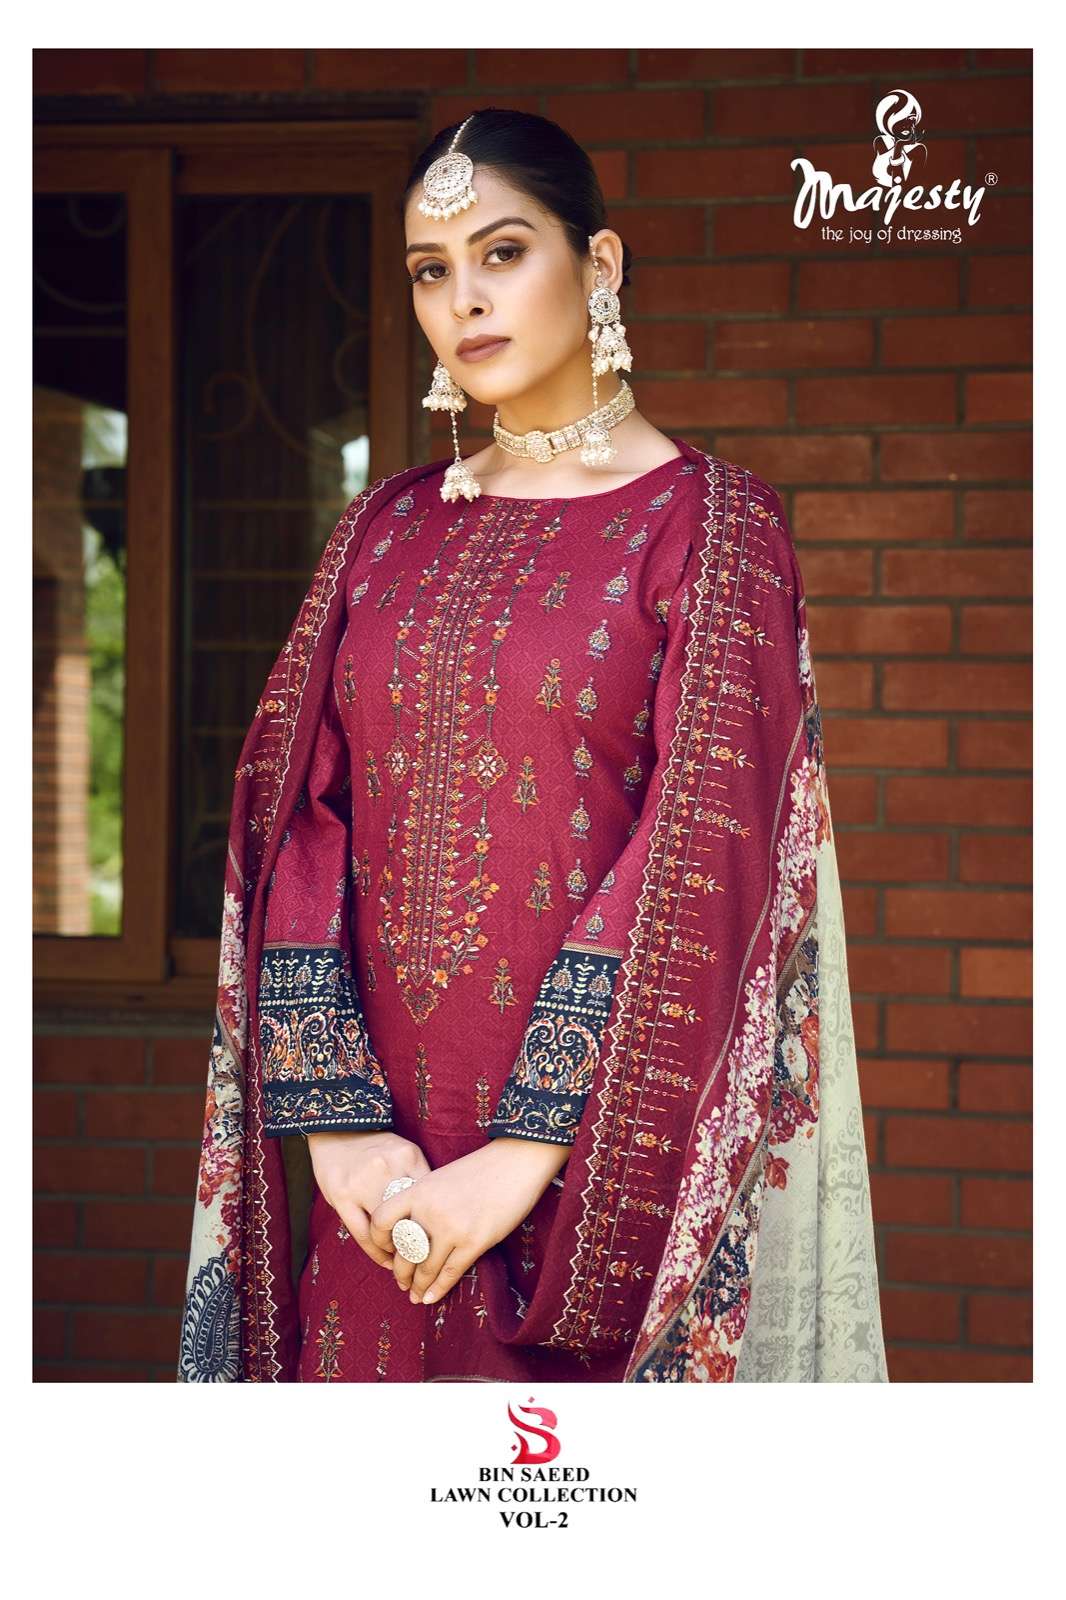 BIN SAEED LAWN COLLECTION VOL-2 BY MAJESTY 2001 TO 2004 SERIES COTTON PAKISTANI DRESSES